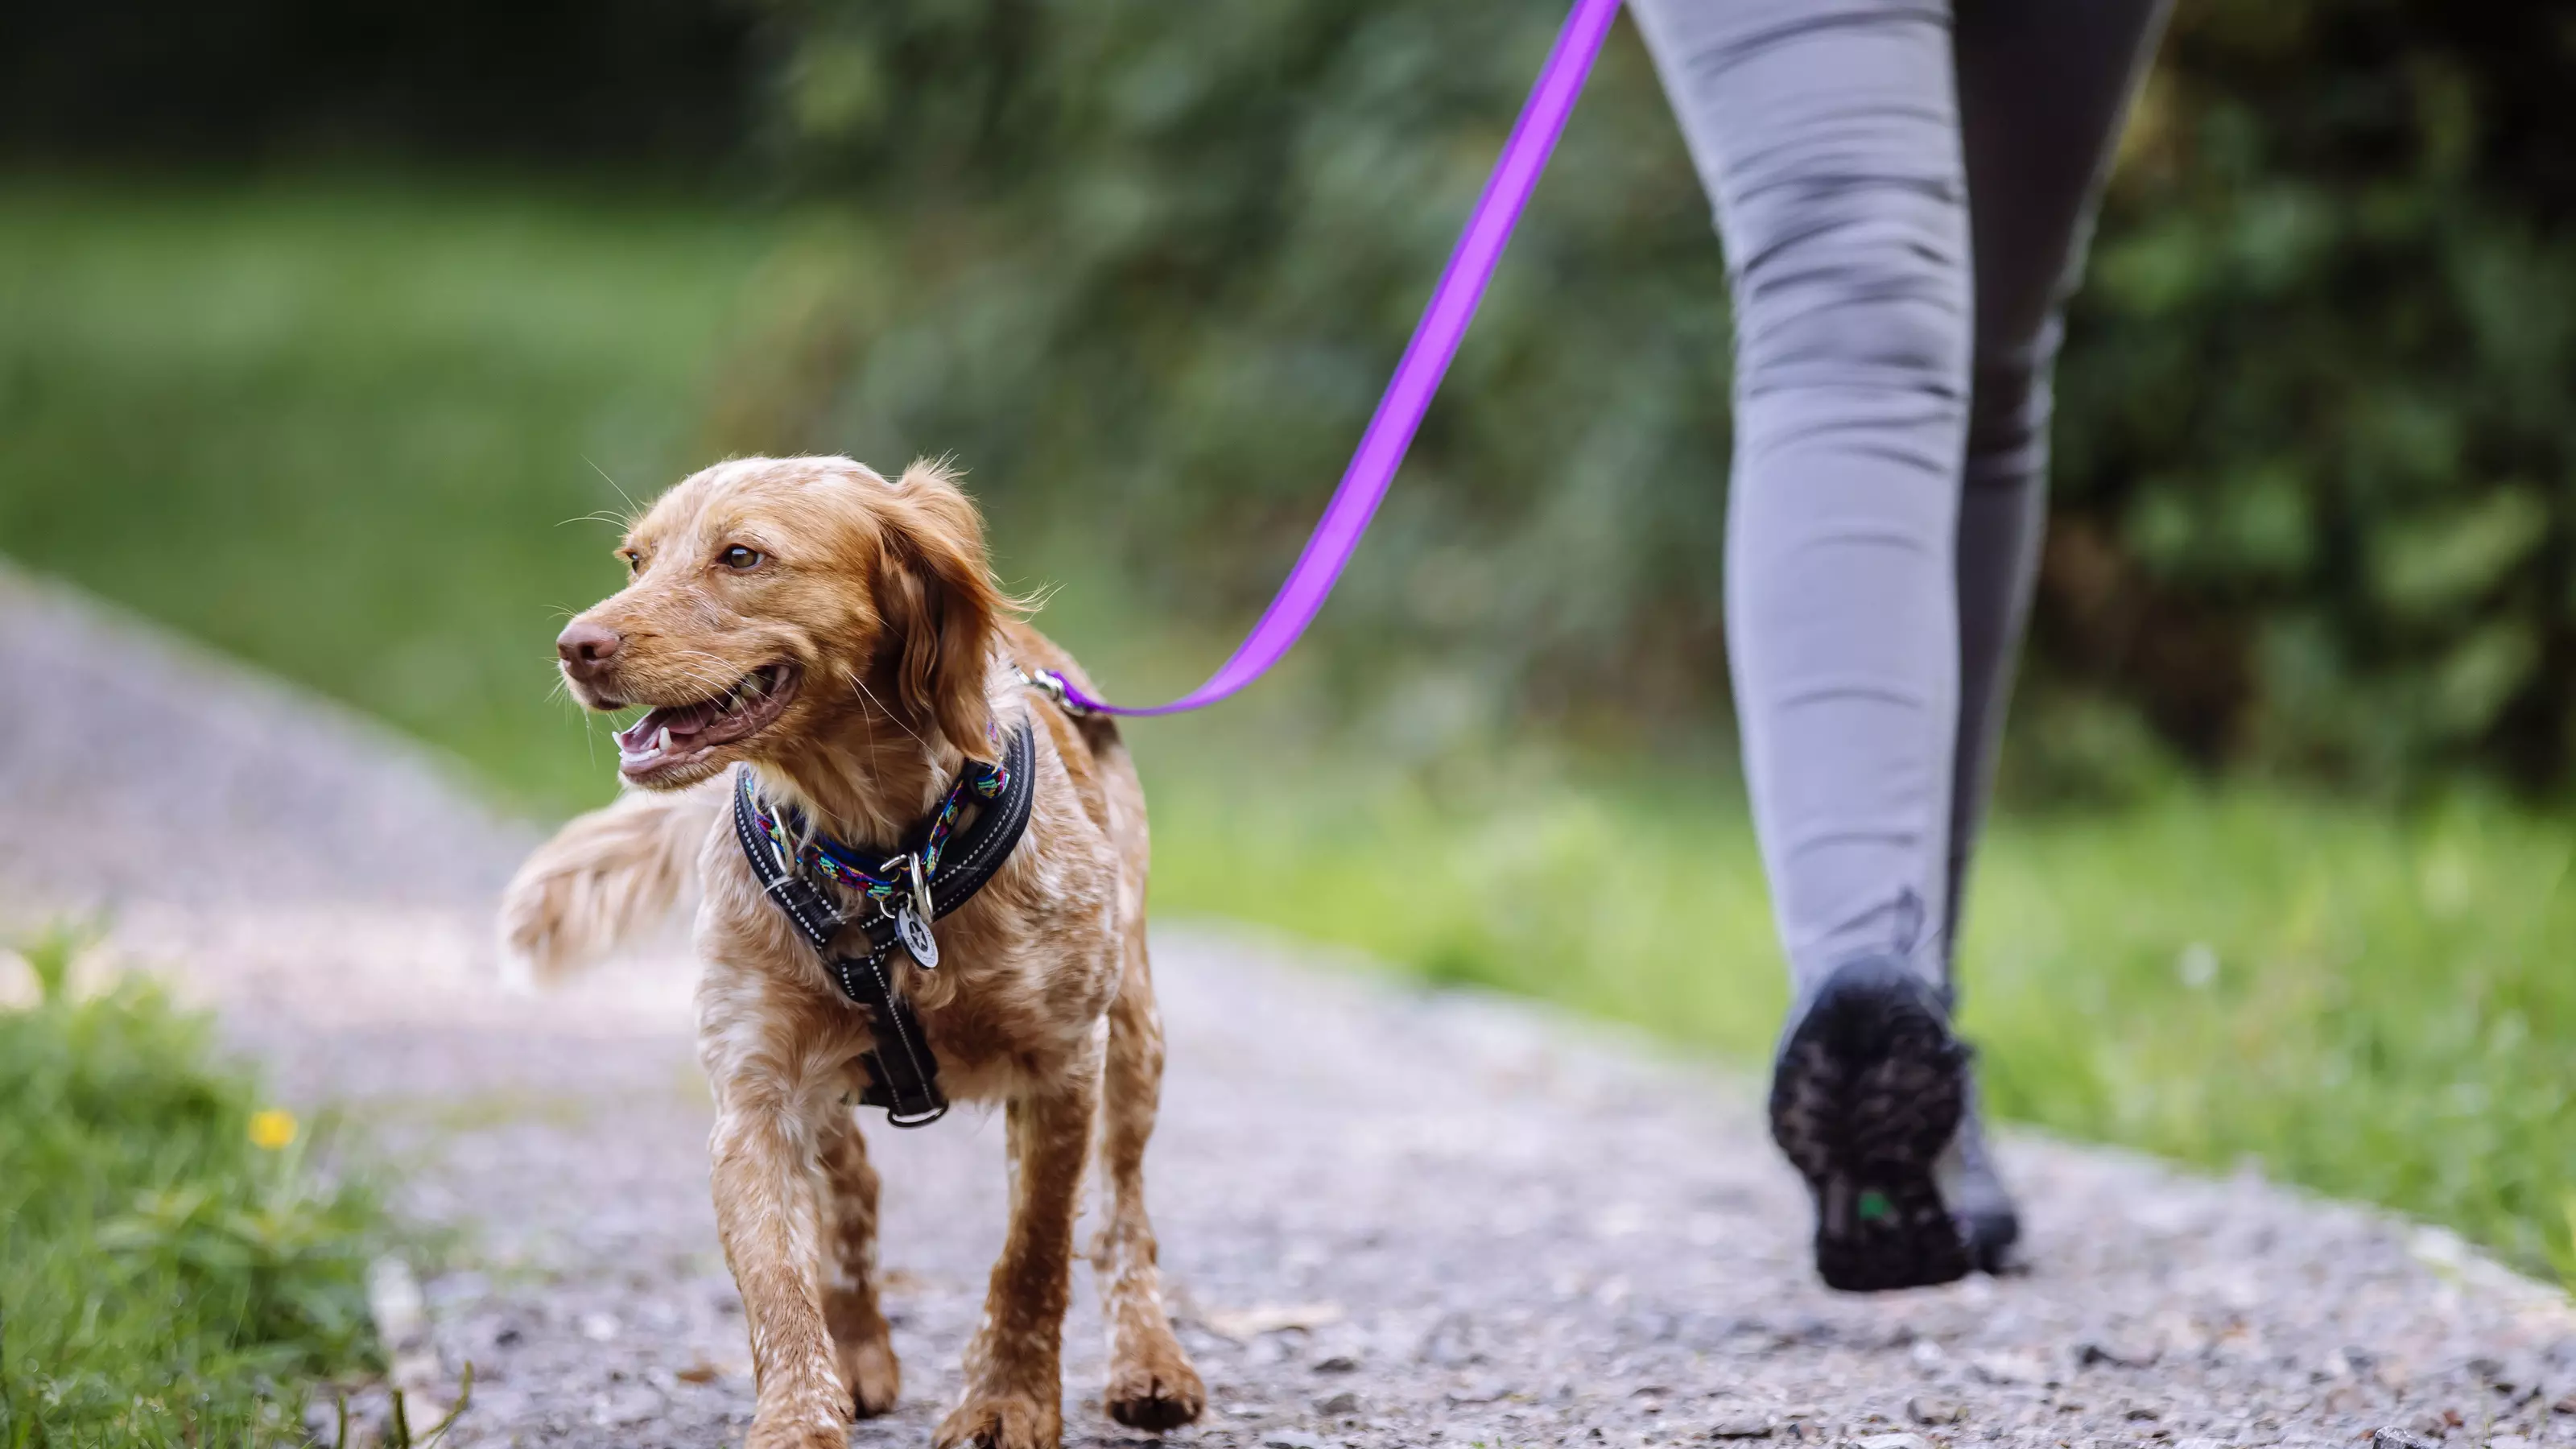 A red cocker spaniel cross walks along a path on a purple lead, her tail wagging